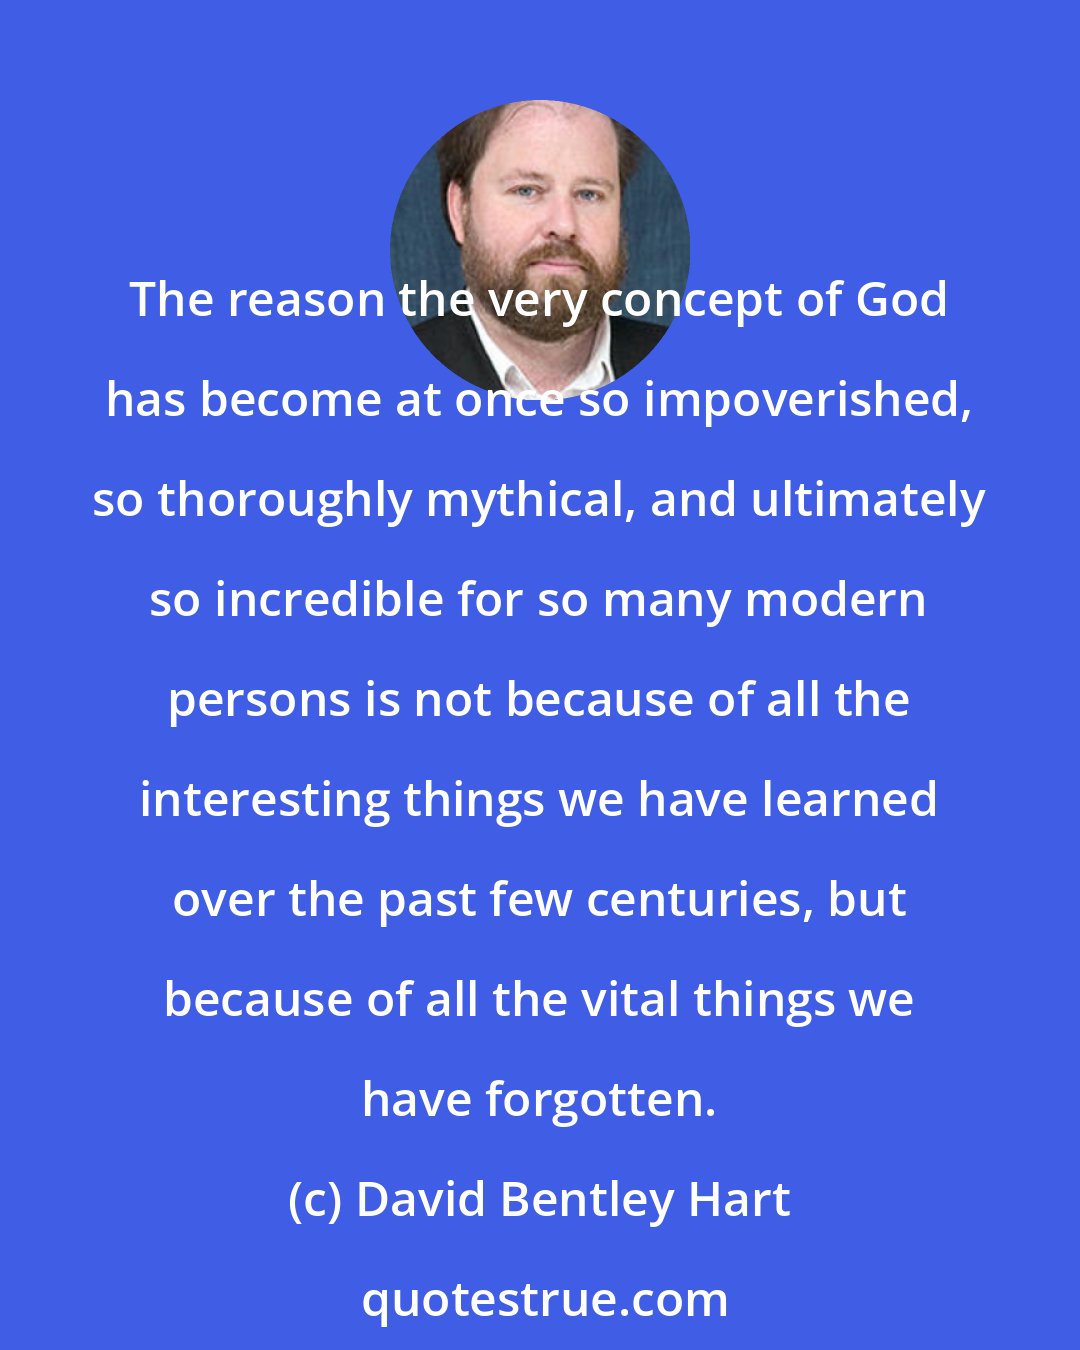 David Bentley Hart: The reason the very concept of God has become at once so impoverished, so thoroughly mythical, and ultimately so incredible for so many modern persons is not because of all the interesting things we have learned over the past few centuries, but because of all the vital things we have forgotten.